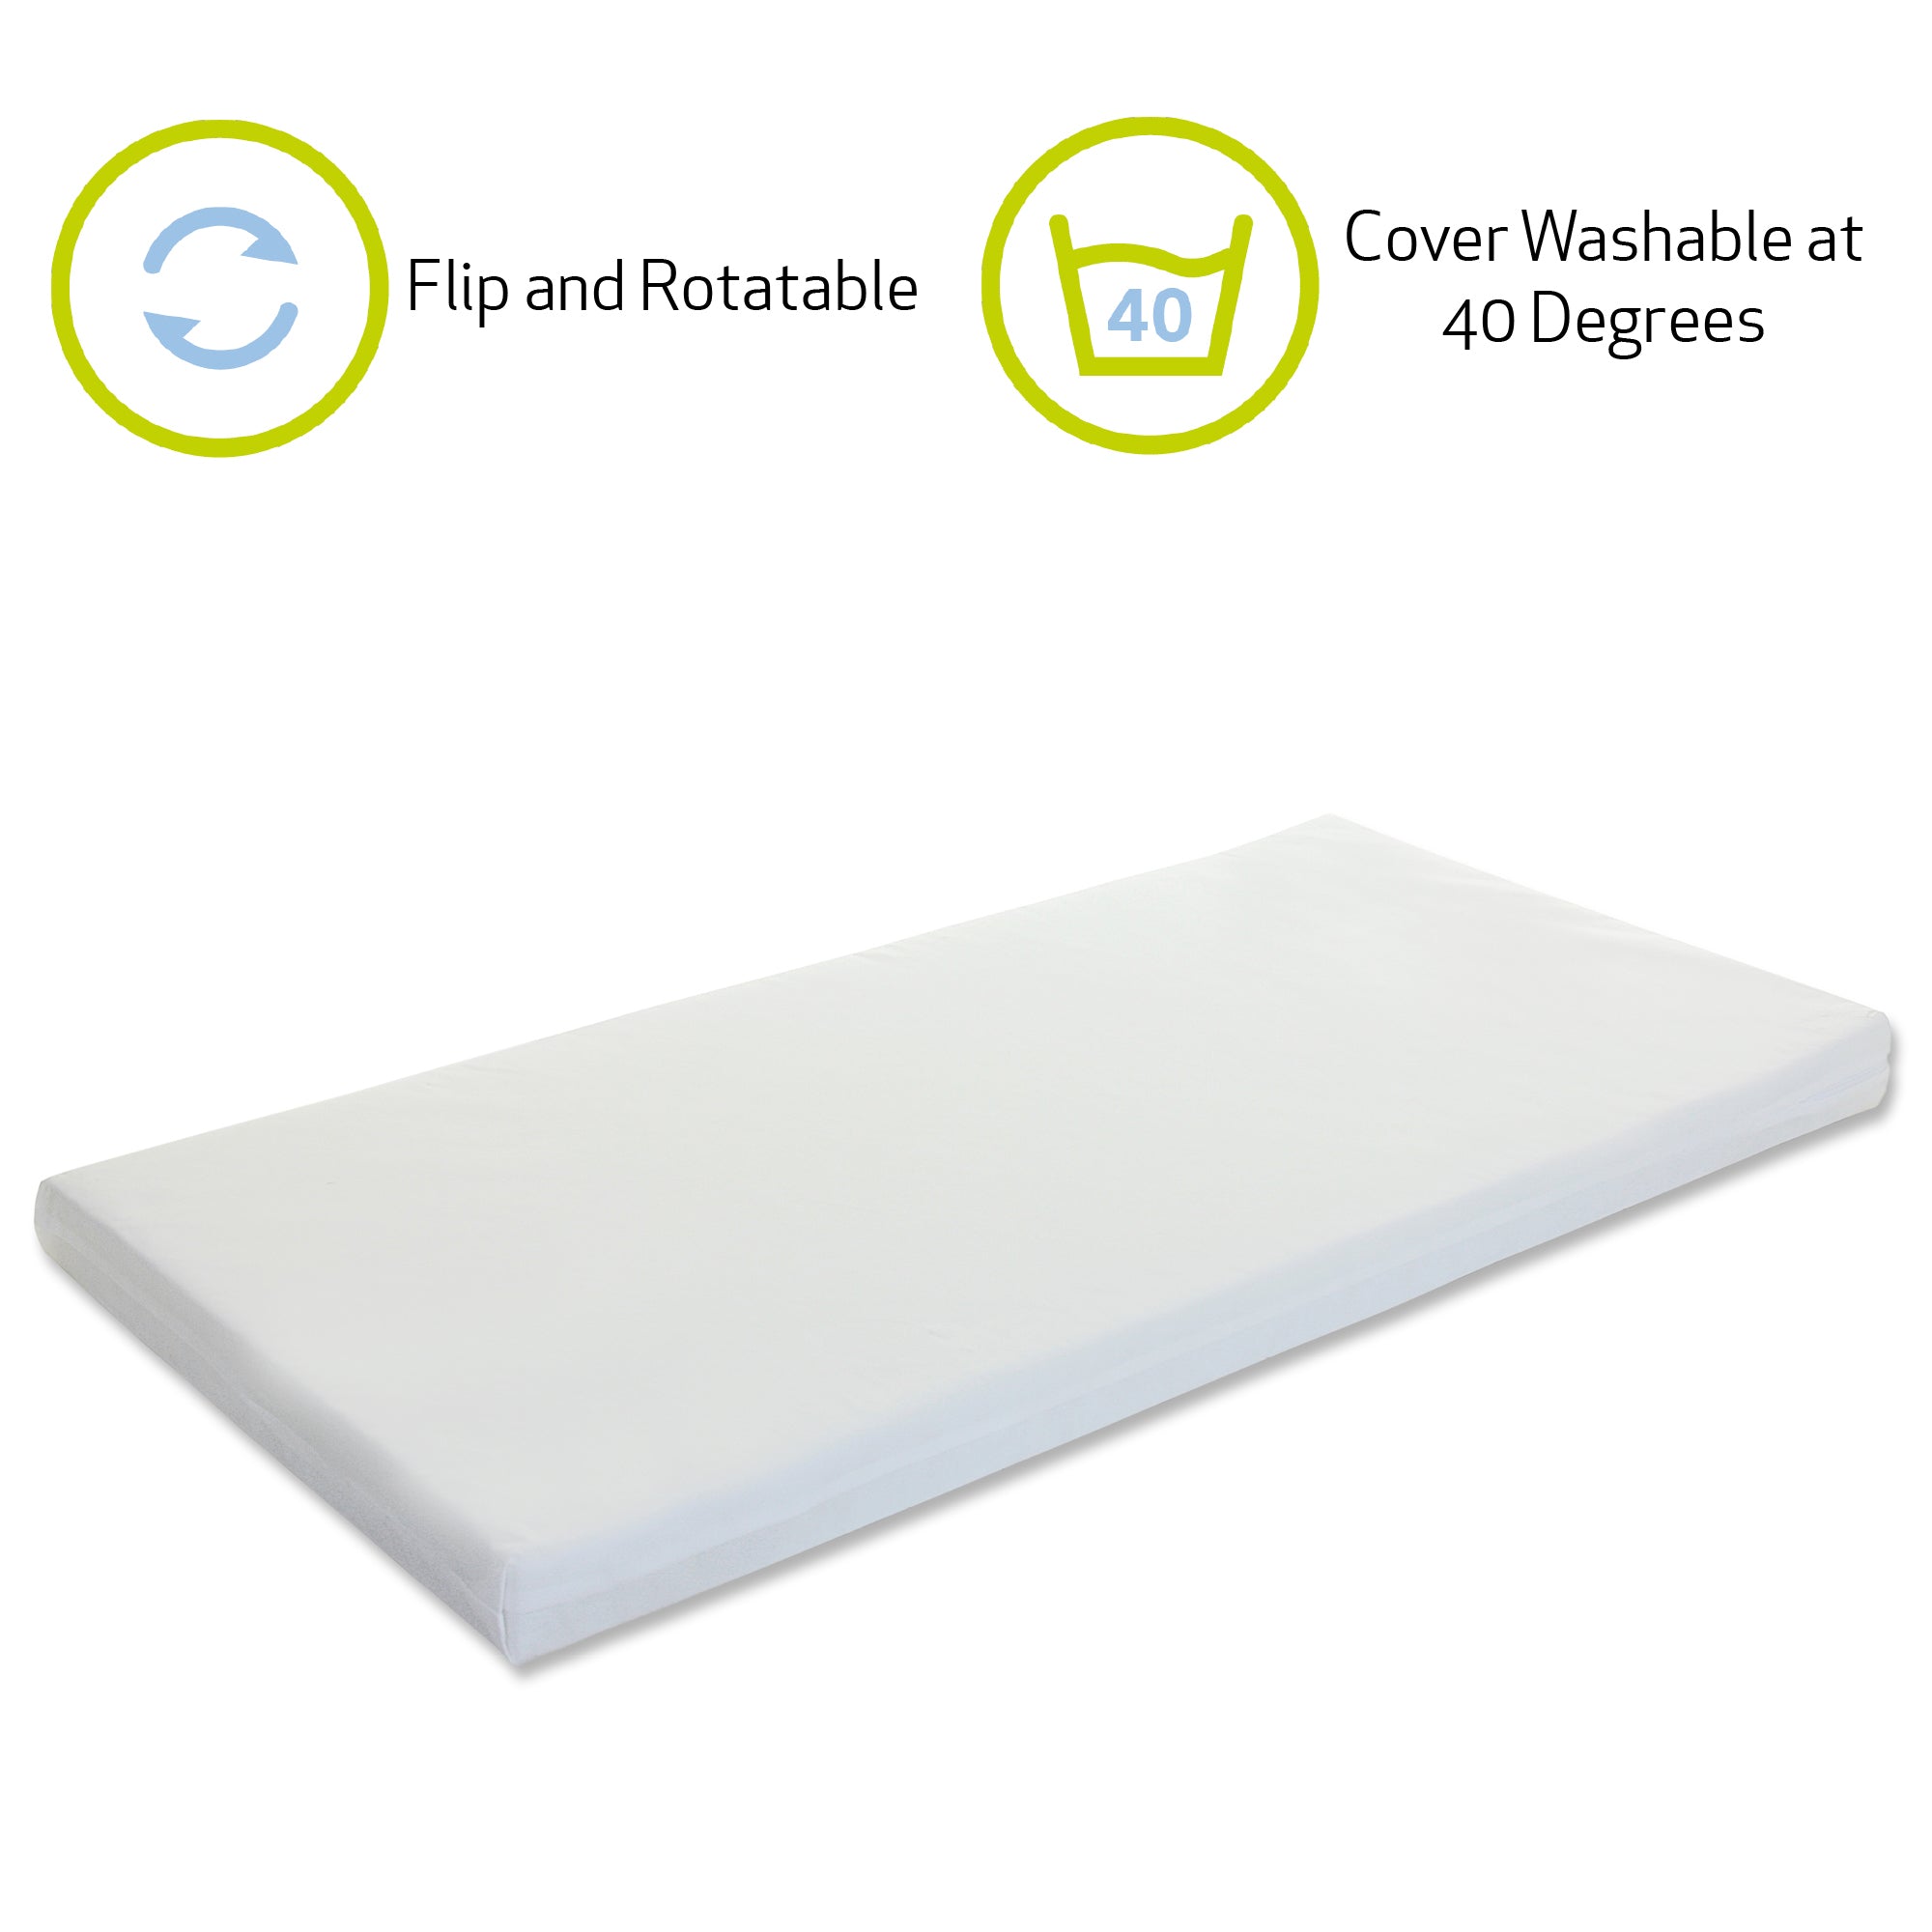 Everyday Eco Airflow Baby Mattress 120x60cm - 15% OFF Applied at Checkout